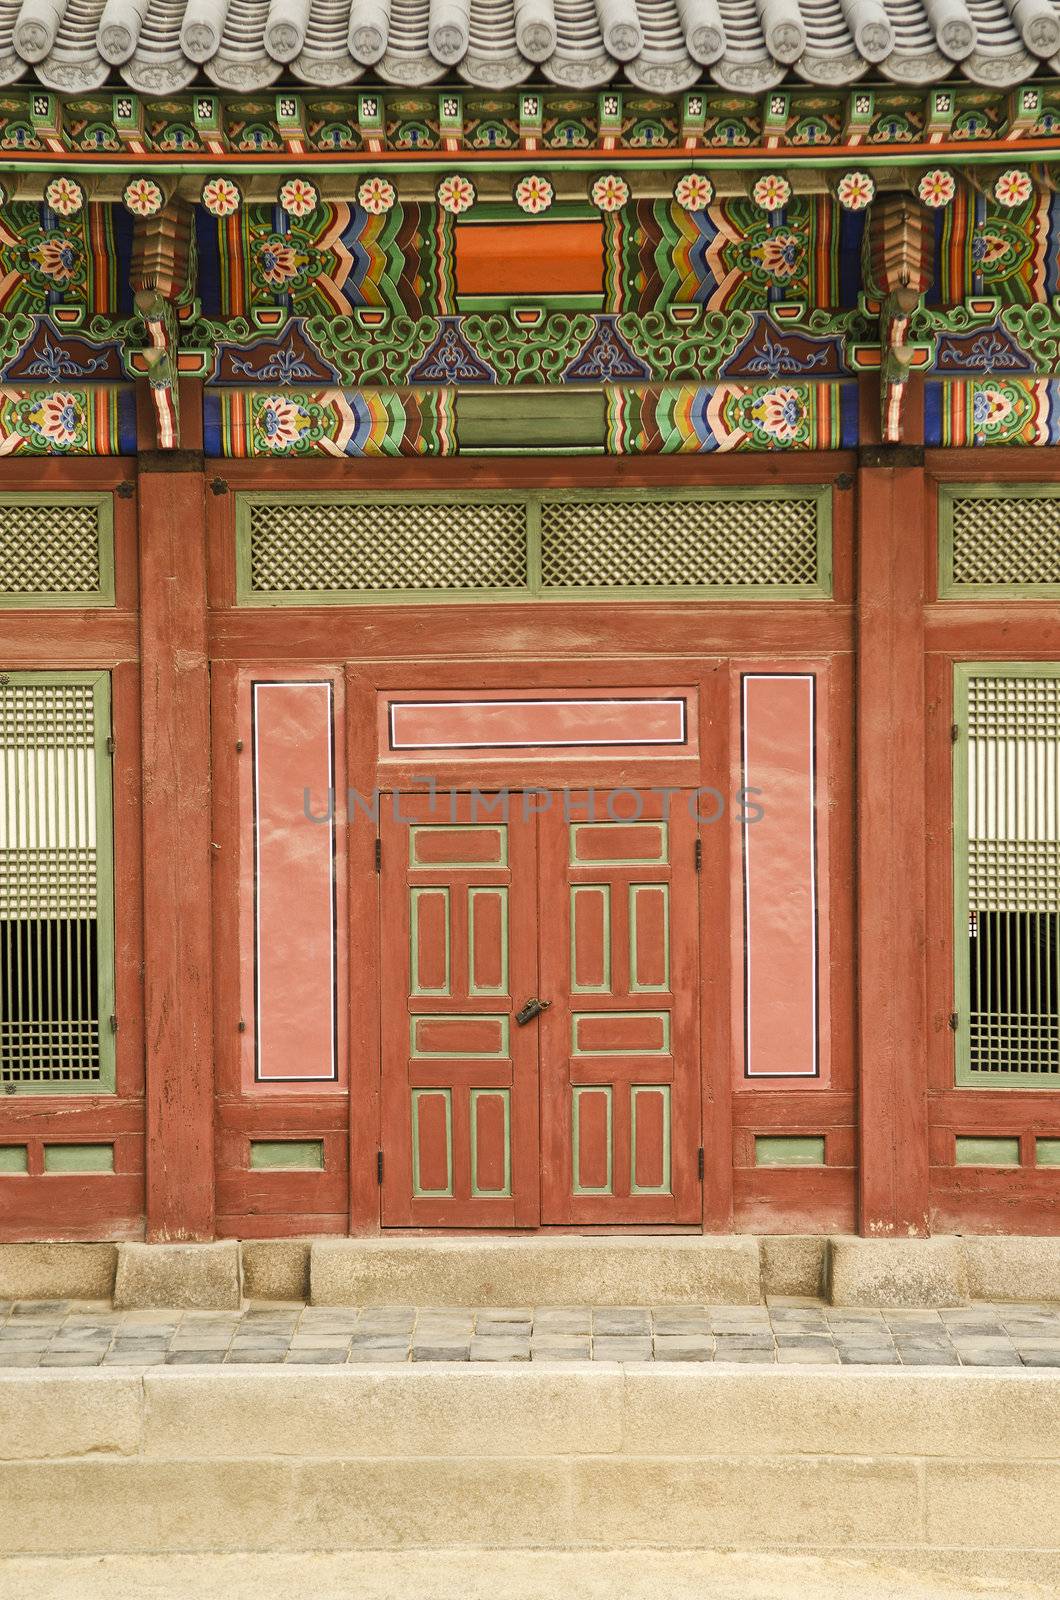 traditional architecture detail in seoul south korea palace by jackmalipan